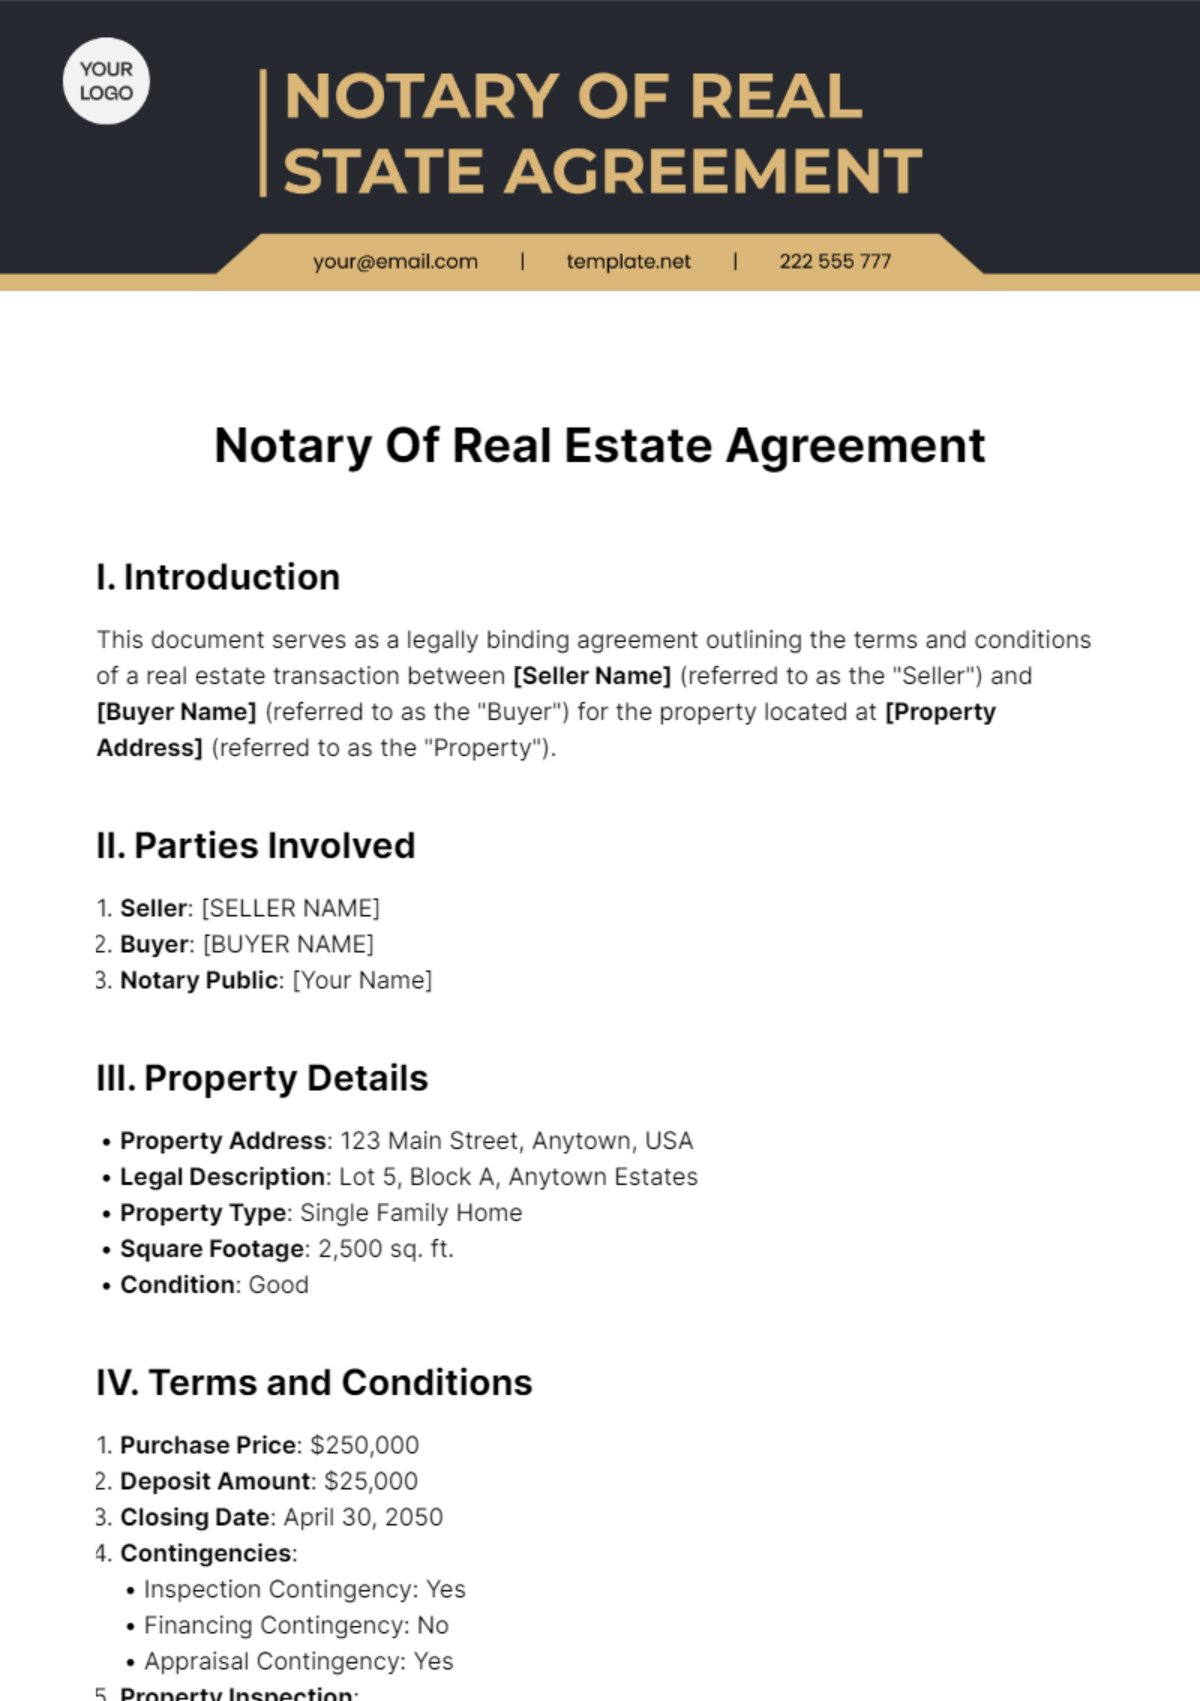 Notary Of Real Estate Agreement Template